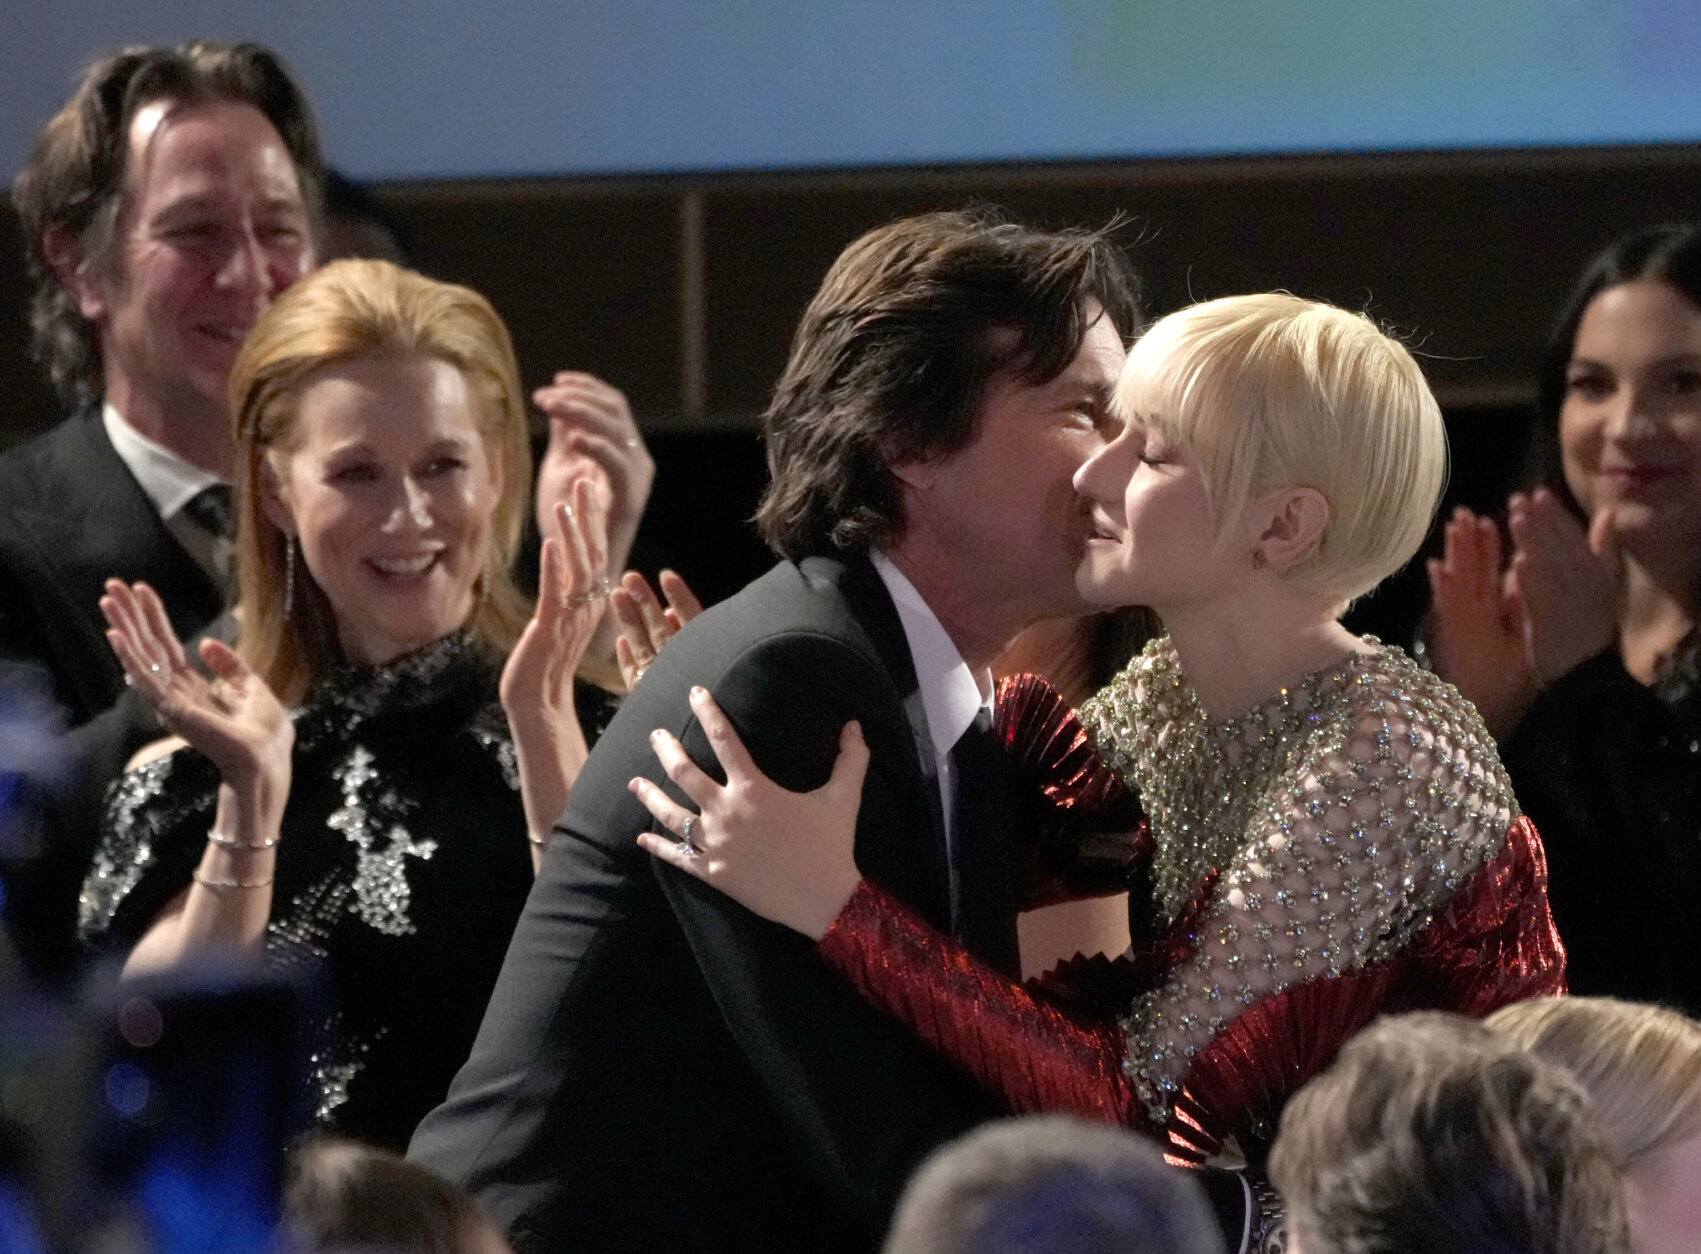 Julia Garner, right, hugs Jason Bateman in the audience as he accepts the award for outstanding performance by a male actor in a drama series for "Ozark" at the 29th annual Screen Actors Guild Awards on Sunday, Feb. 26, 2023, at the Fairmont Century Plaza in Los Angeles. (AP Photo/Chris Pizzello)